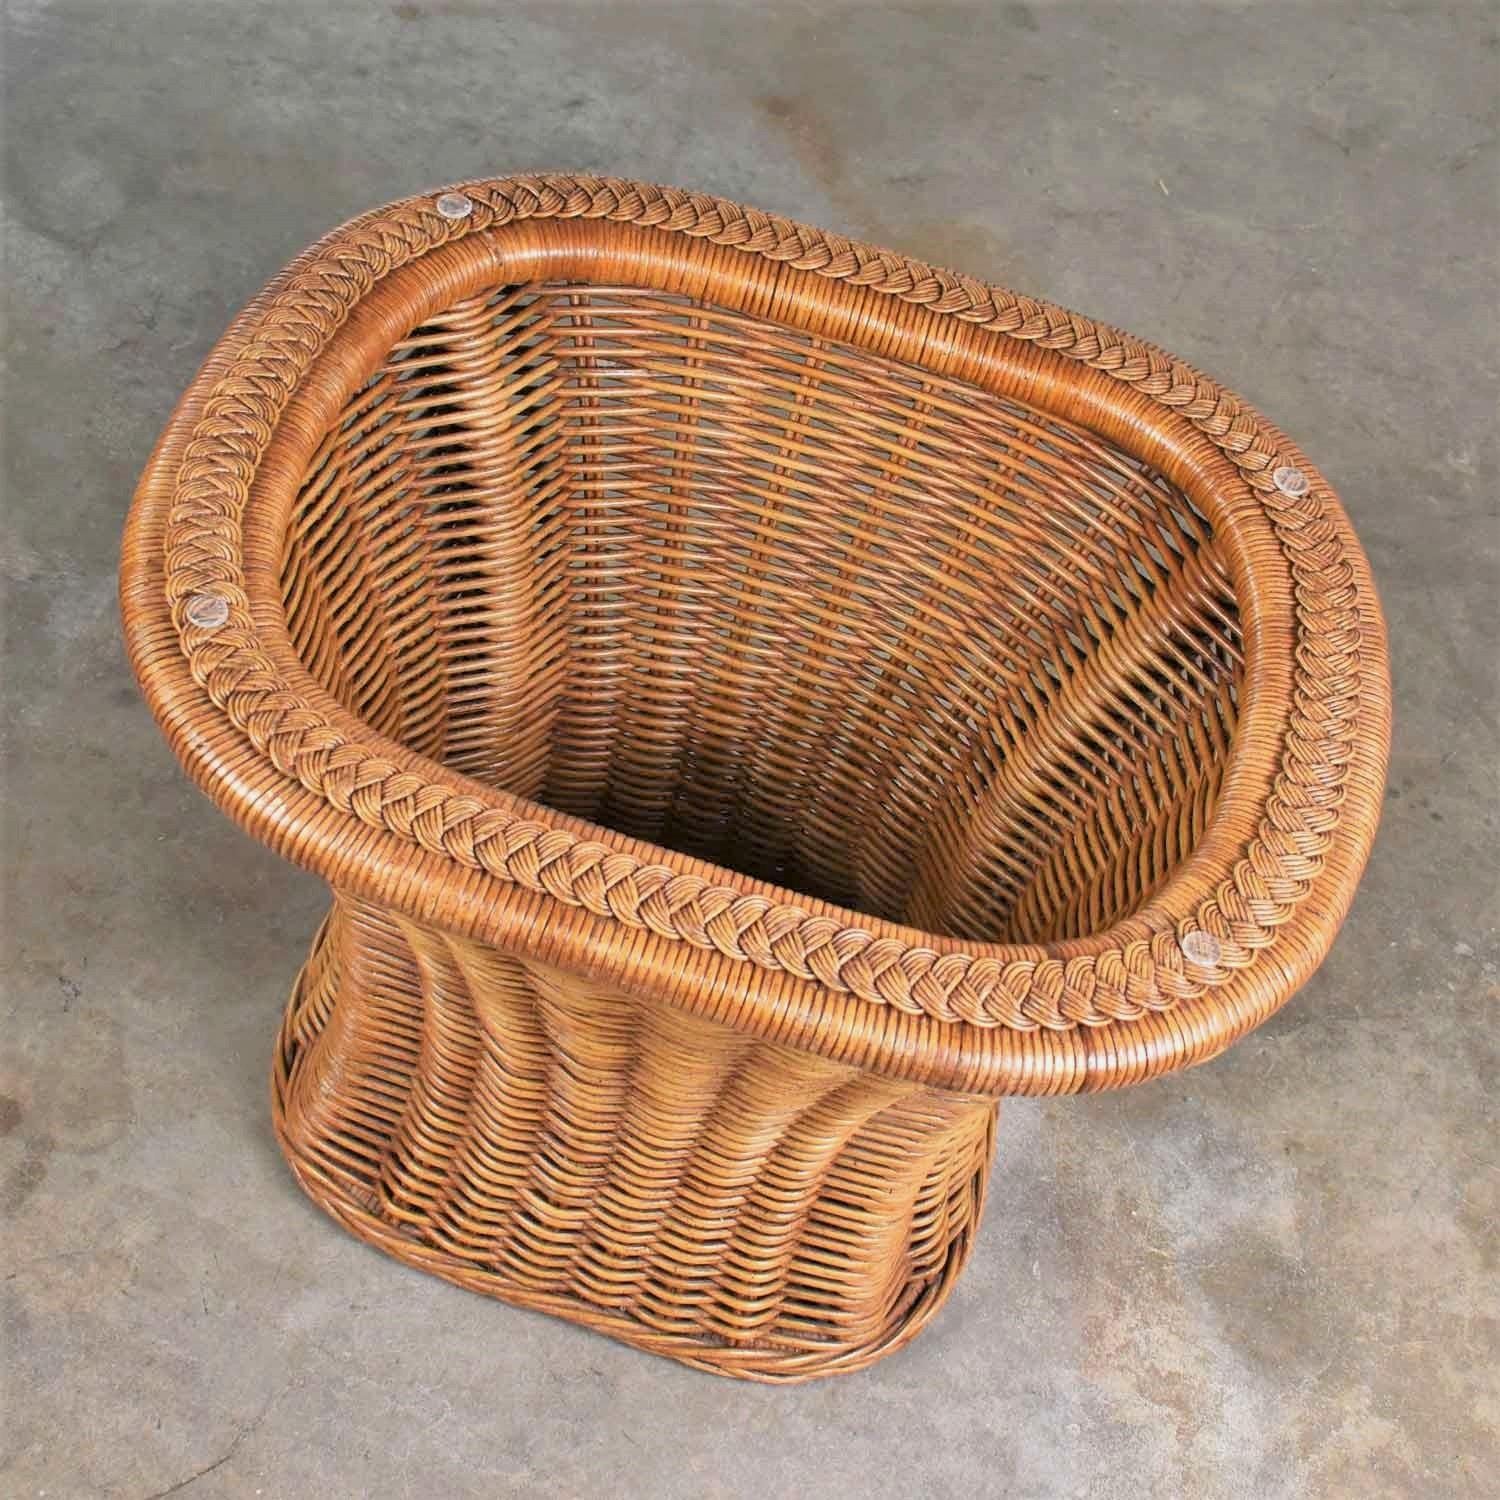 Organic Modern Woven Wicker Rattan Side or End Table with Rectangular Glass For Sale 6